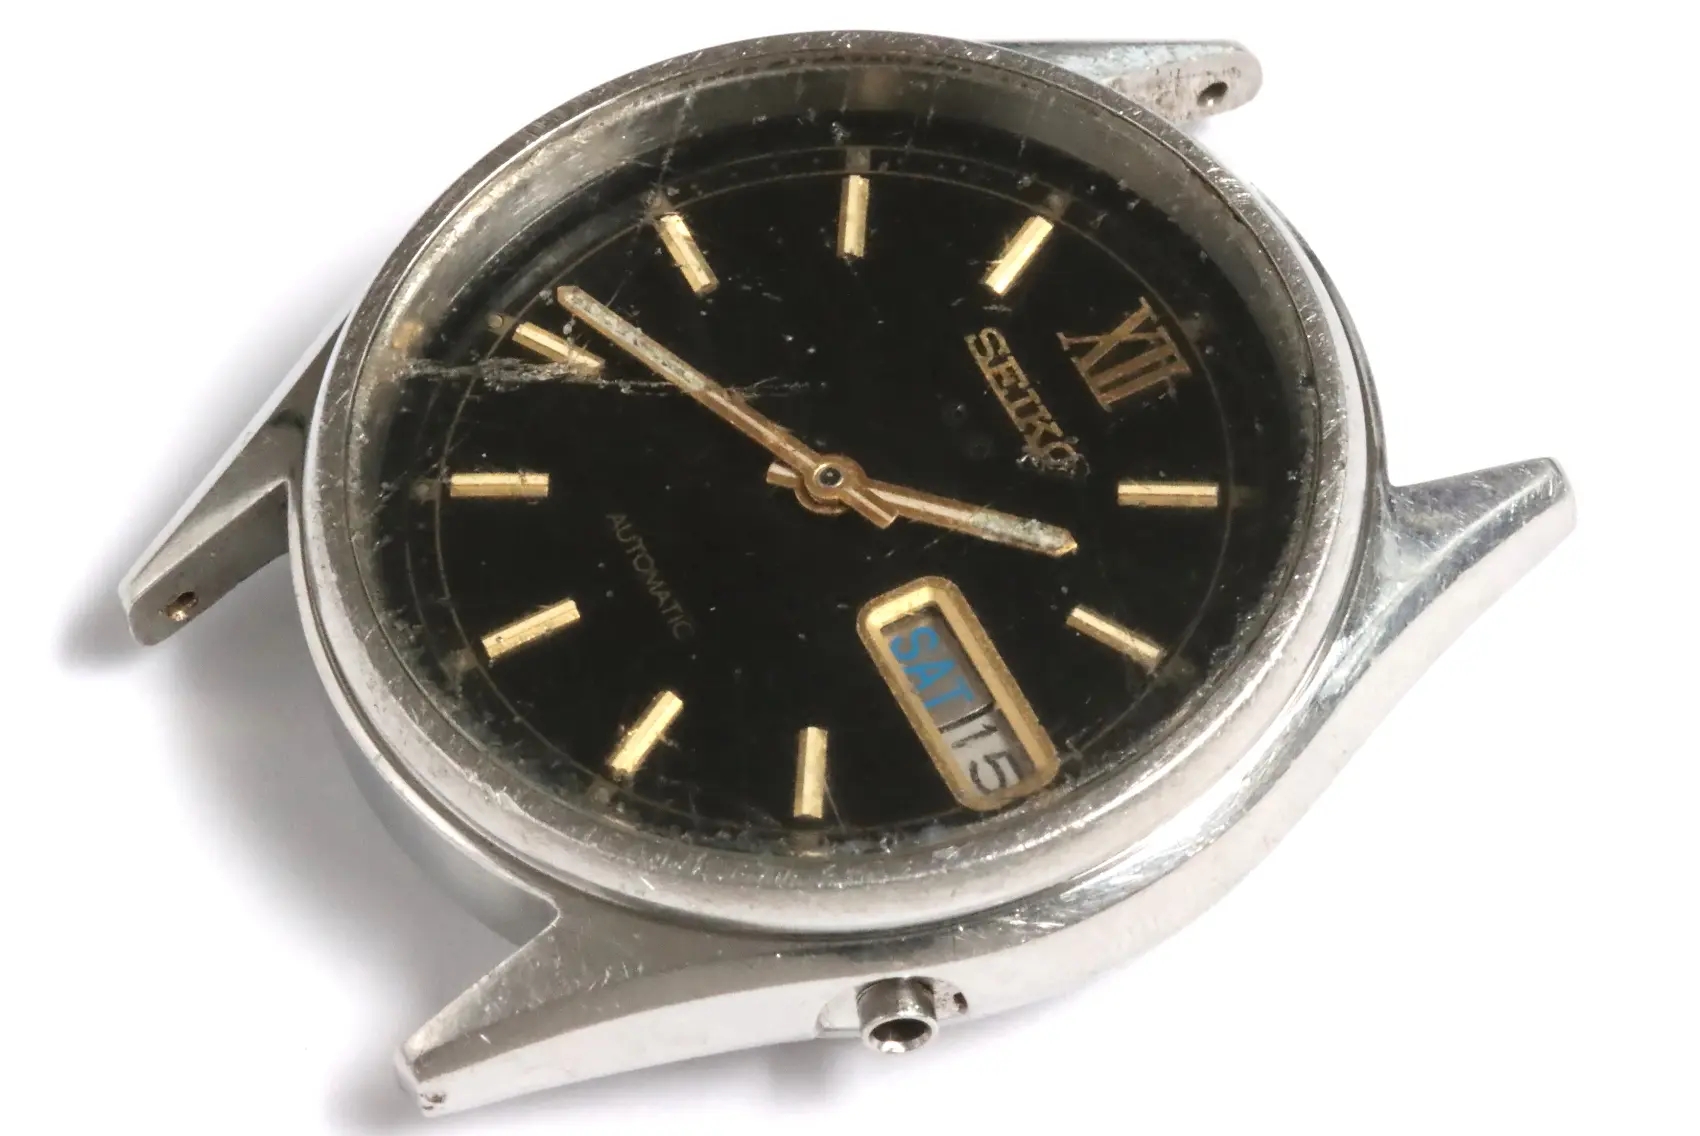 Seiko 7009 mens watch in poor condition